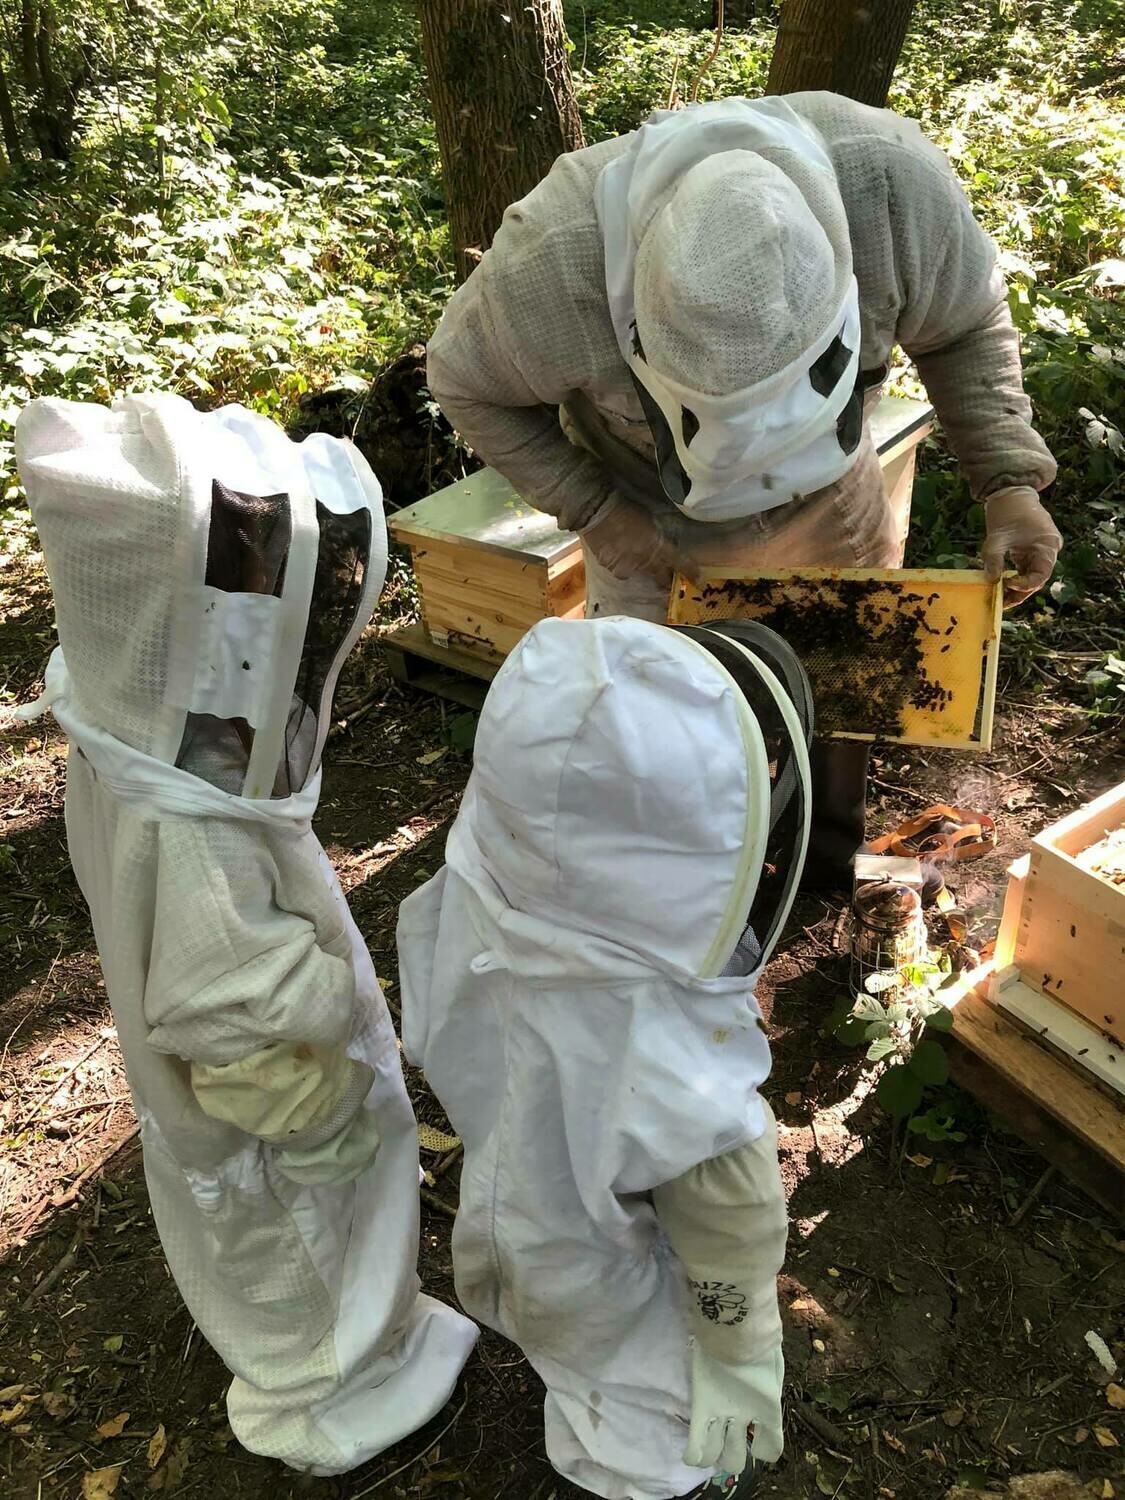 Beekeeping Experience - Full Apiary Inspection